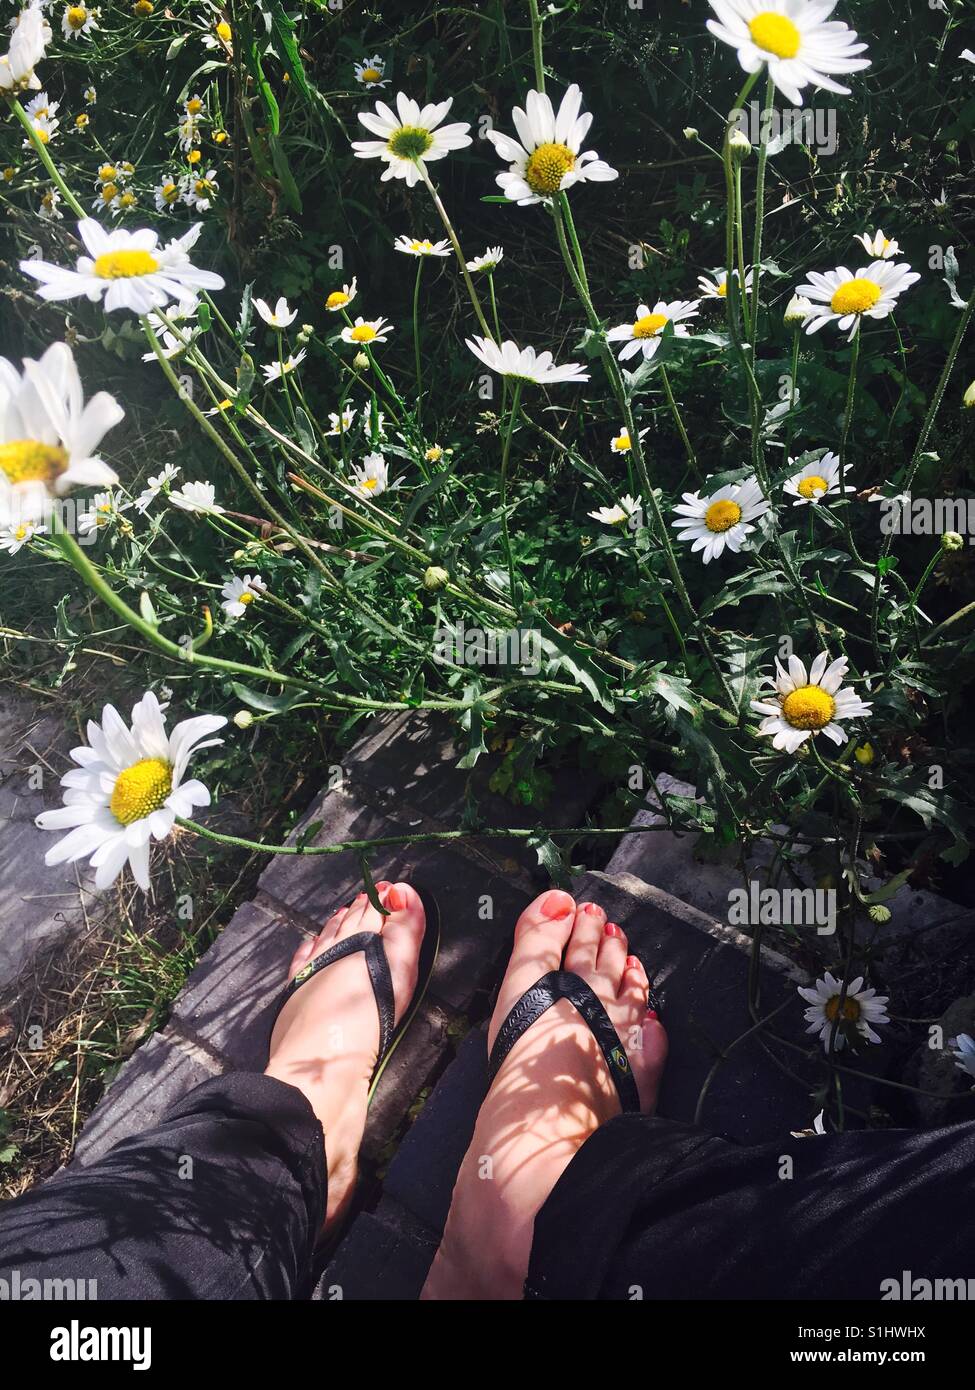 Sitting amongst the daisies in the sunshine Stock Photo